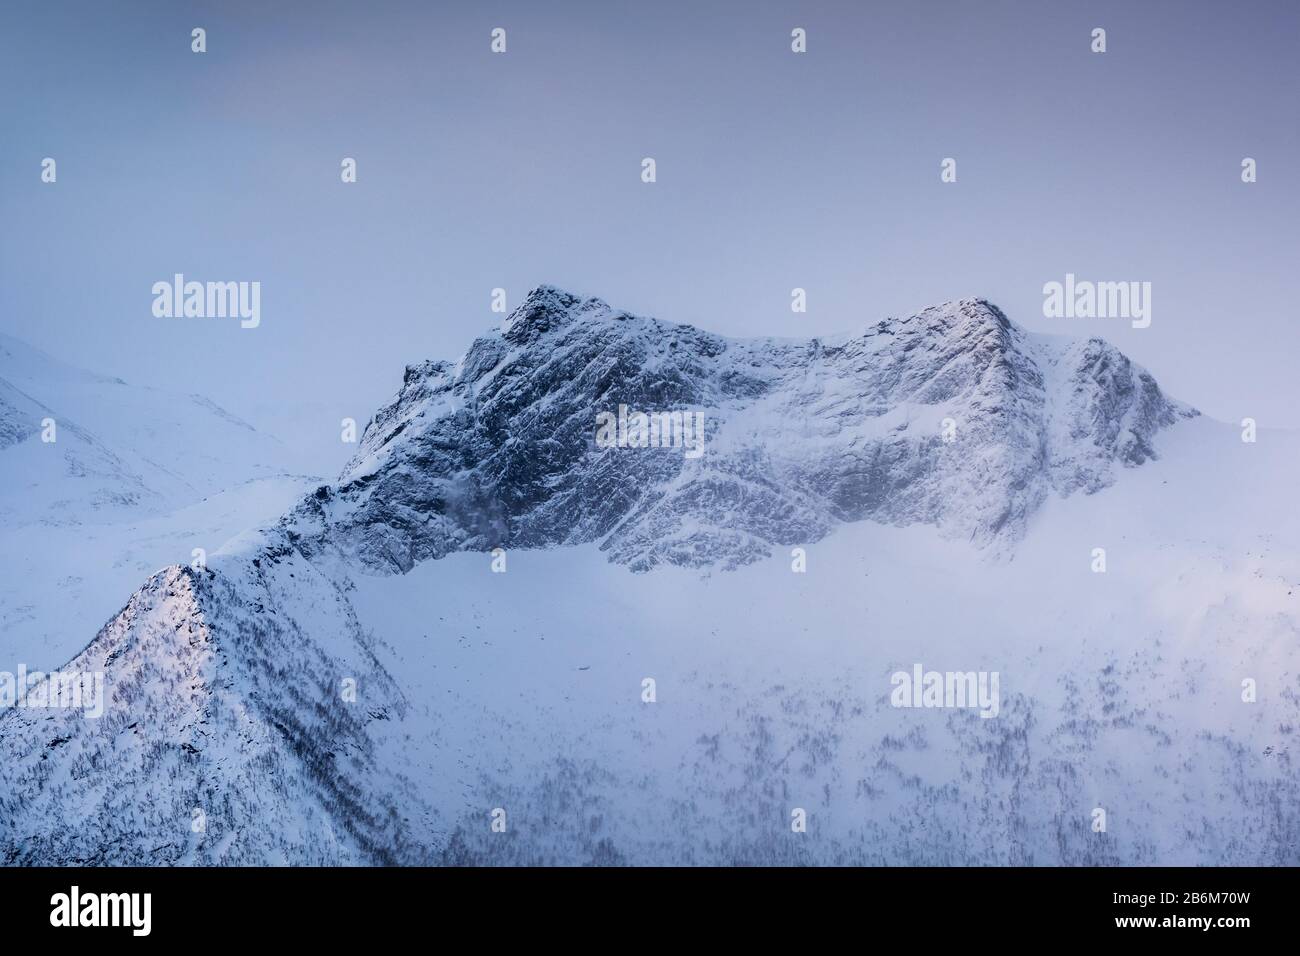 Snowy mountain peak with light in foggy at morning Stock Photo